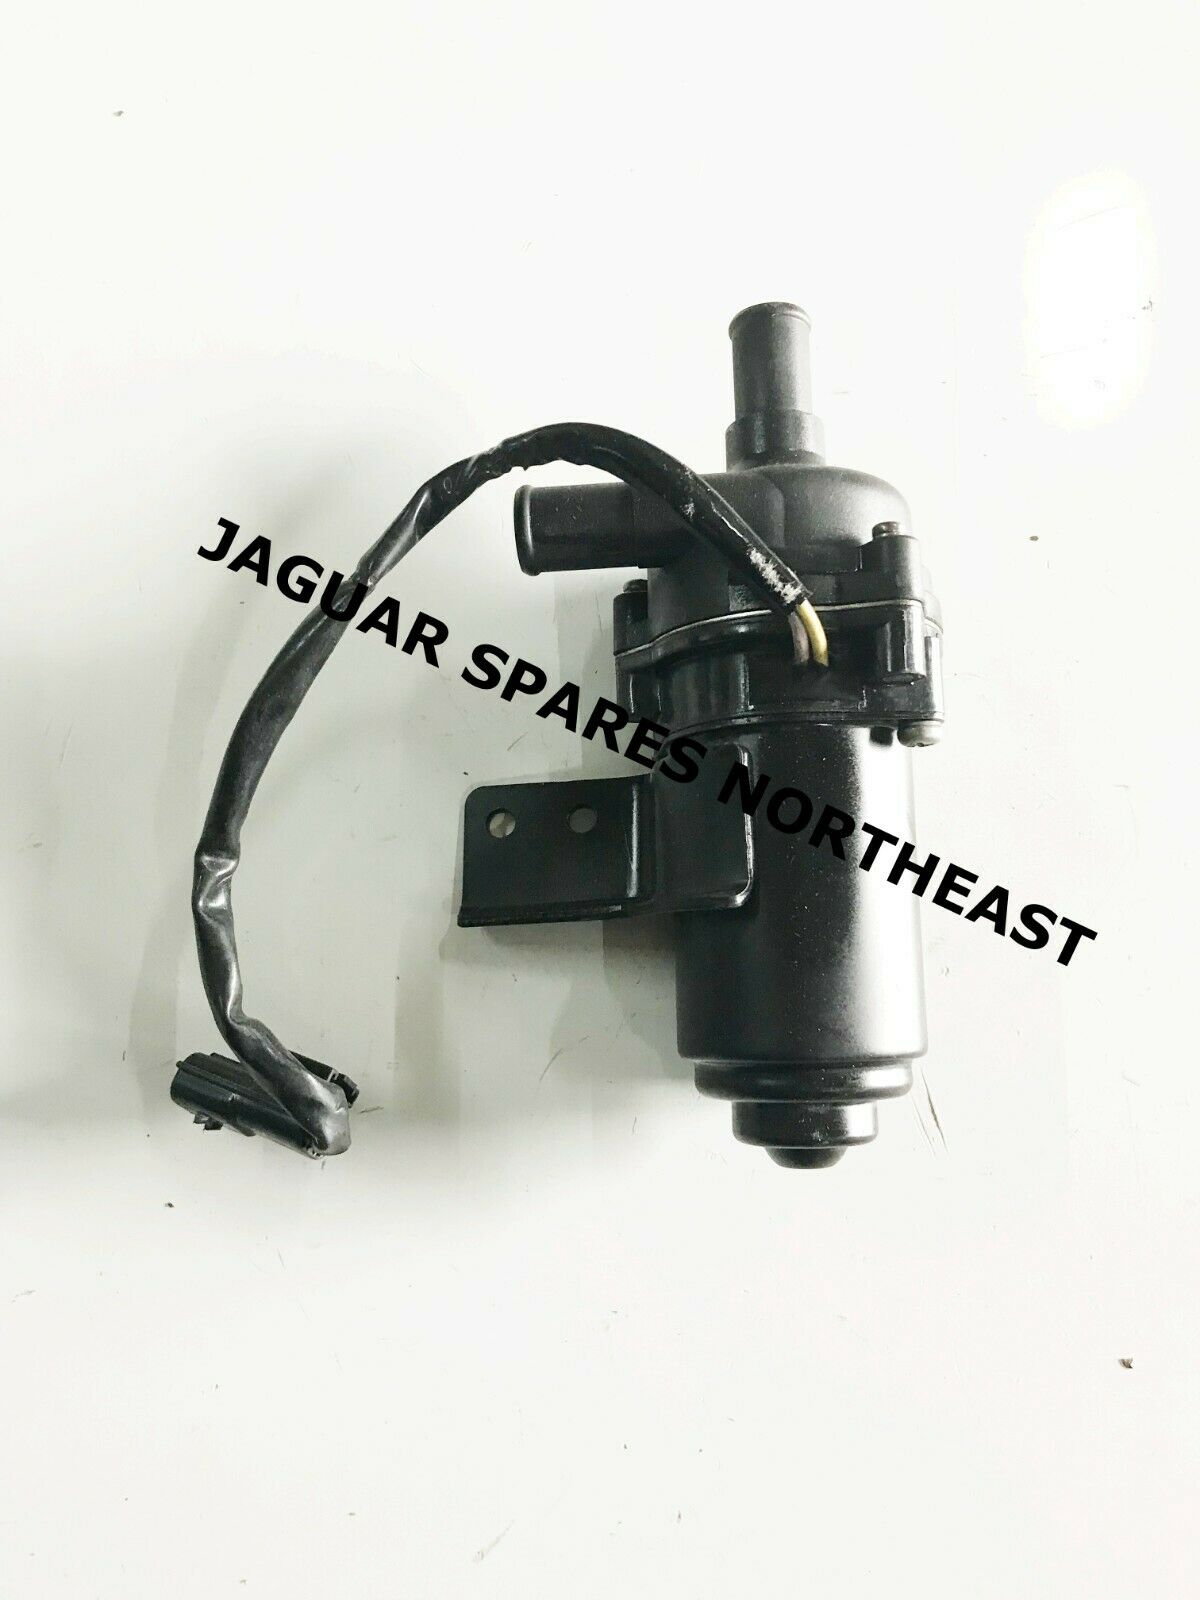 XK8 WATER HEATER PUMP RECONDITIONED - MJA6710AA - Jaguar Spares North East